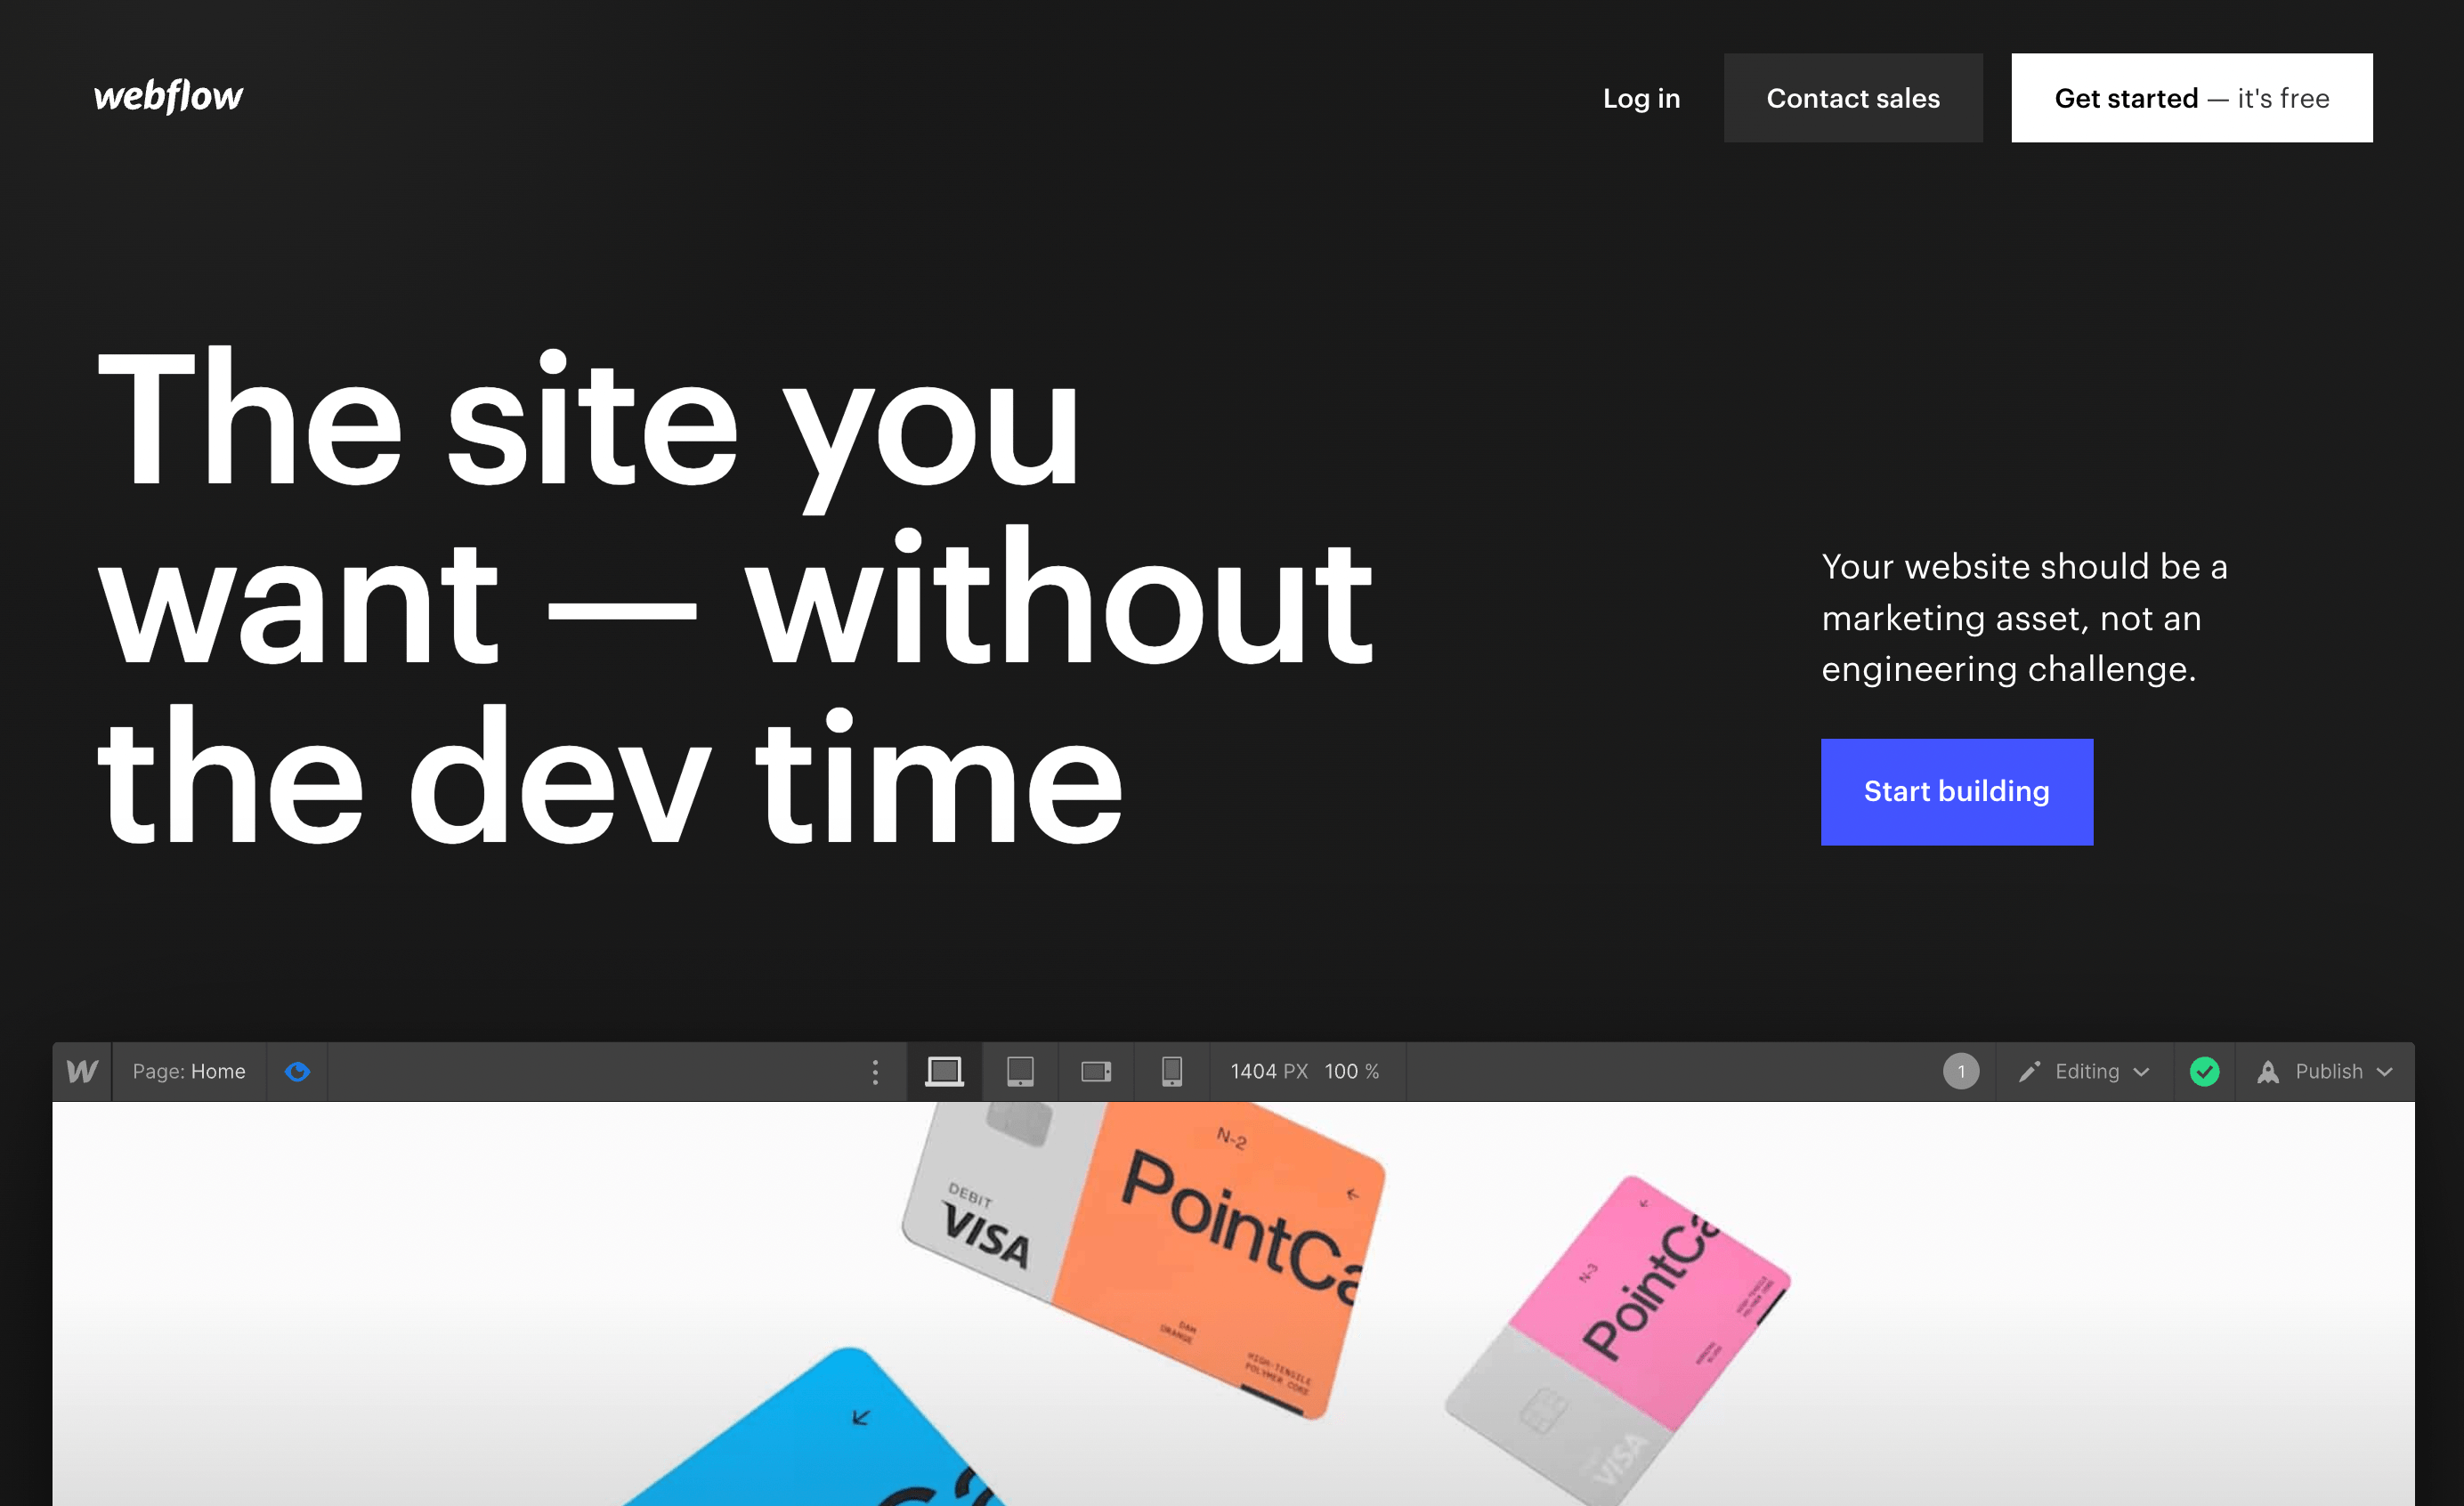 Webflow is among the best portfolio website builders you can use to build an online portfolio.